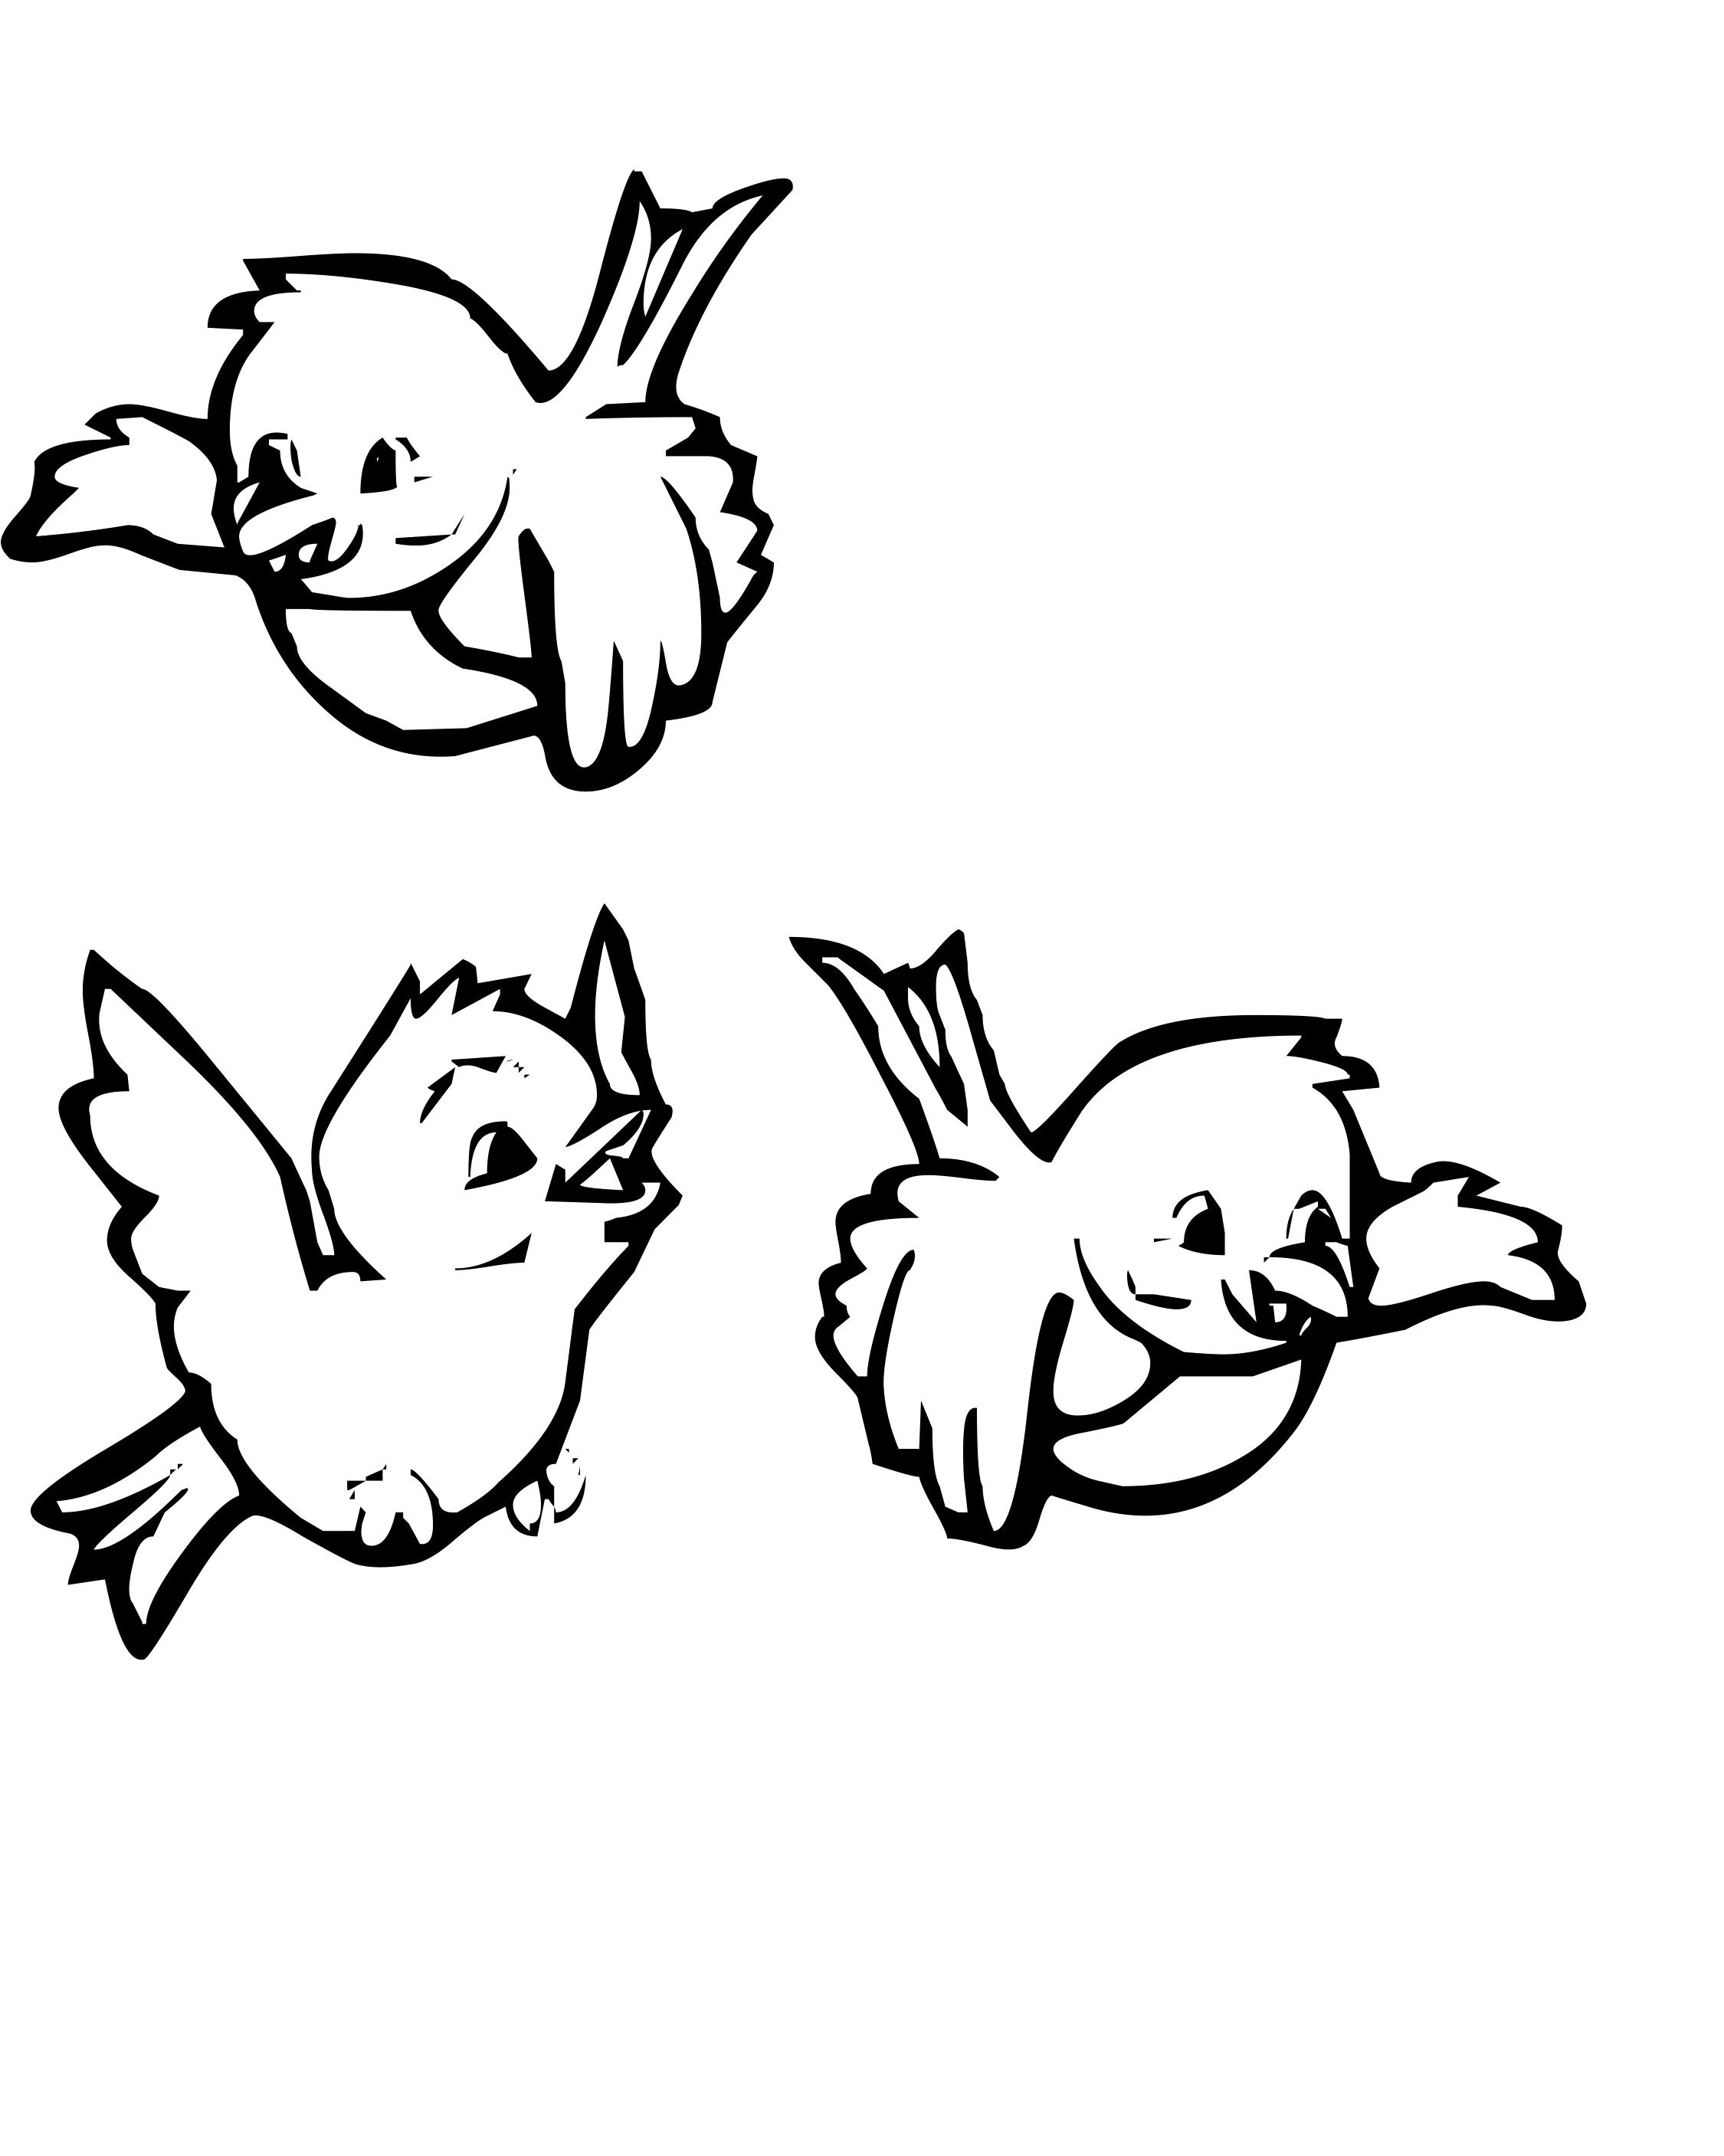 Three Cute Birds Coloring Pages | Animal coloring pages, Unicorn coloring  pages, Bird coloring pages